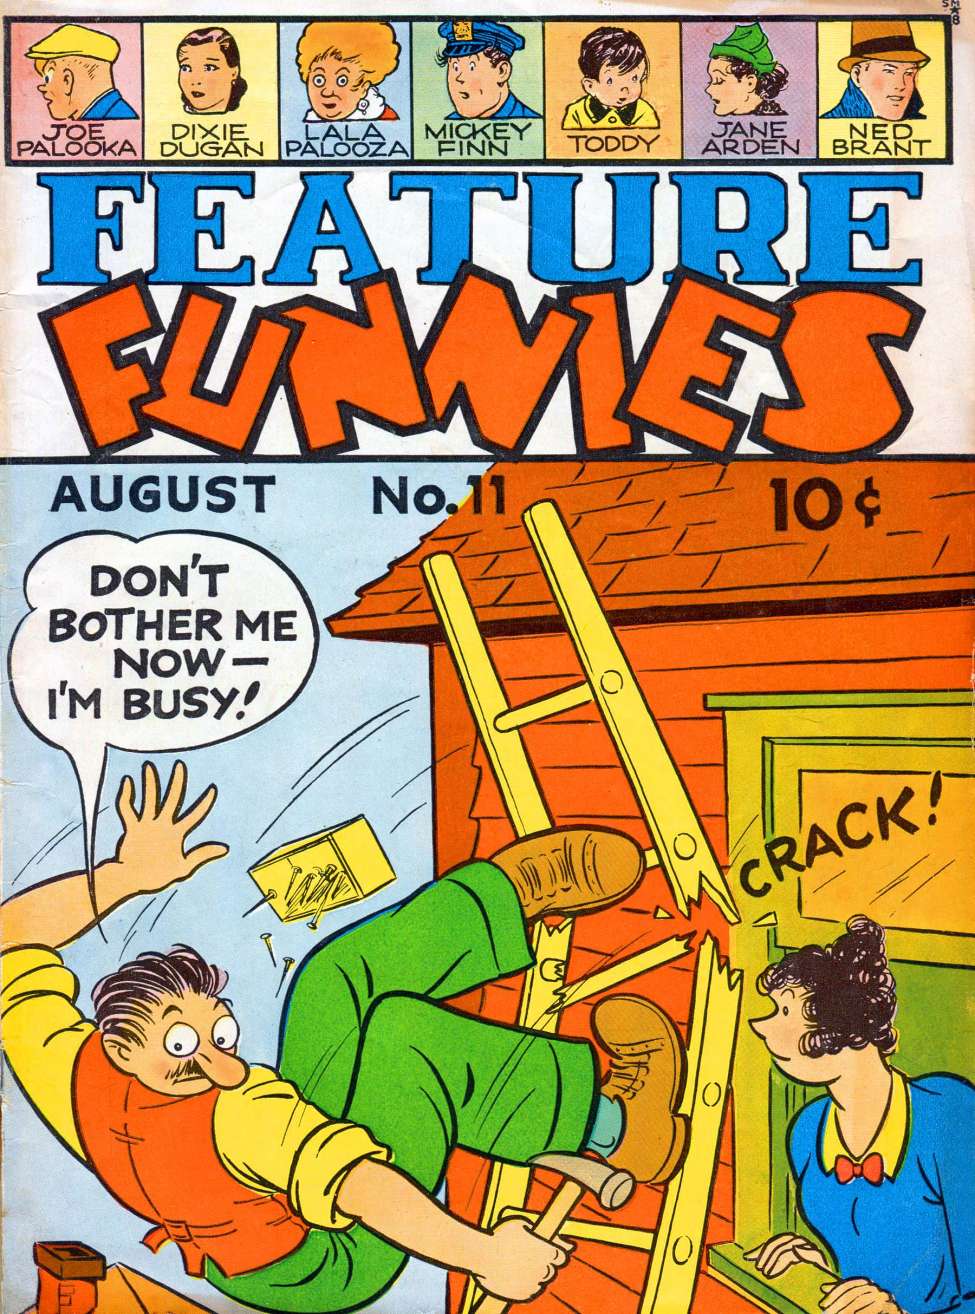 Comic Book Cover For Feature Funnies 11